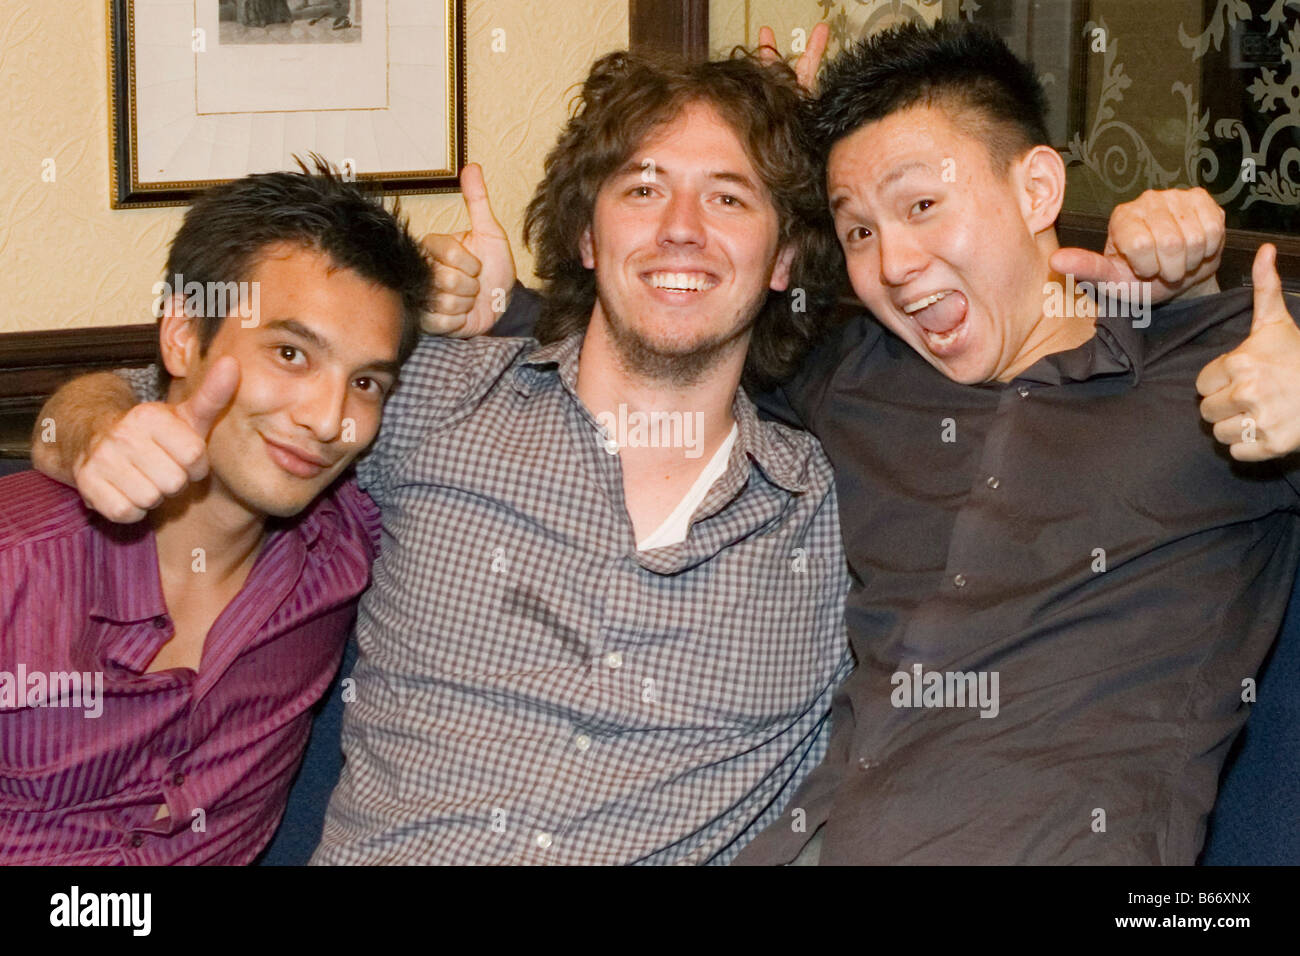 Three young men in a pub in central London Stock Photo